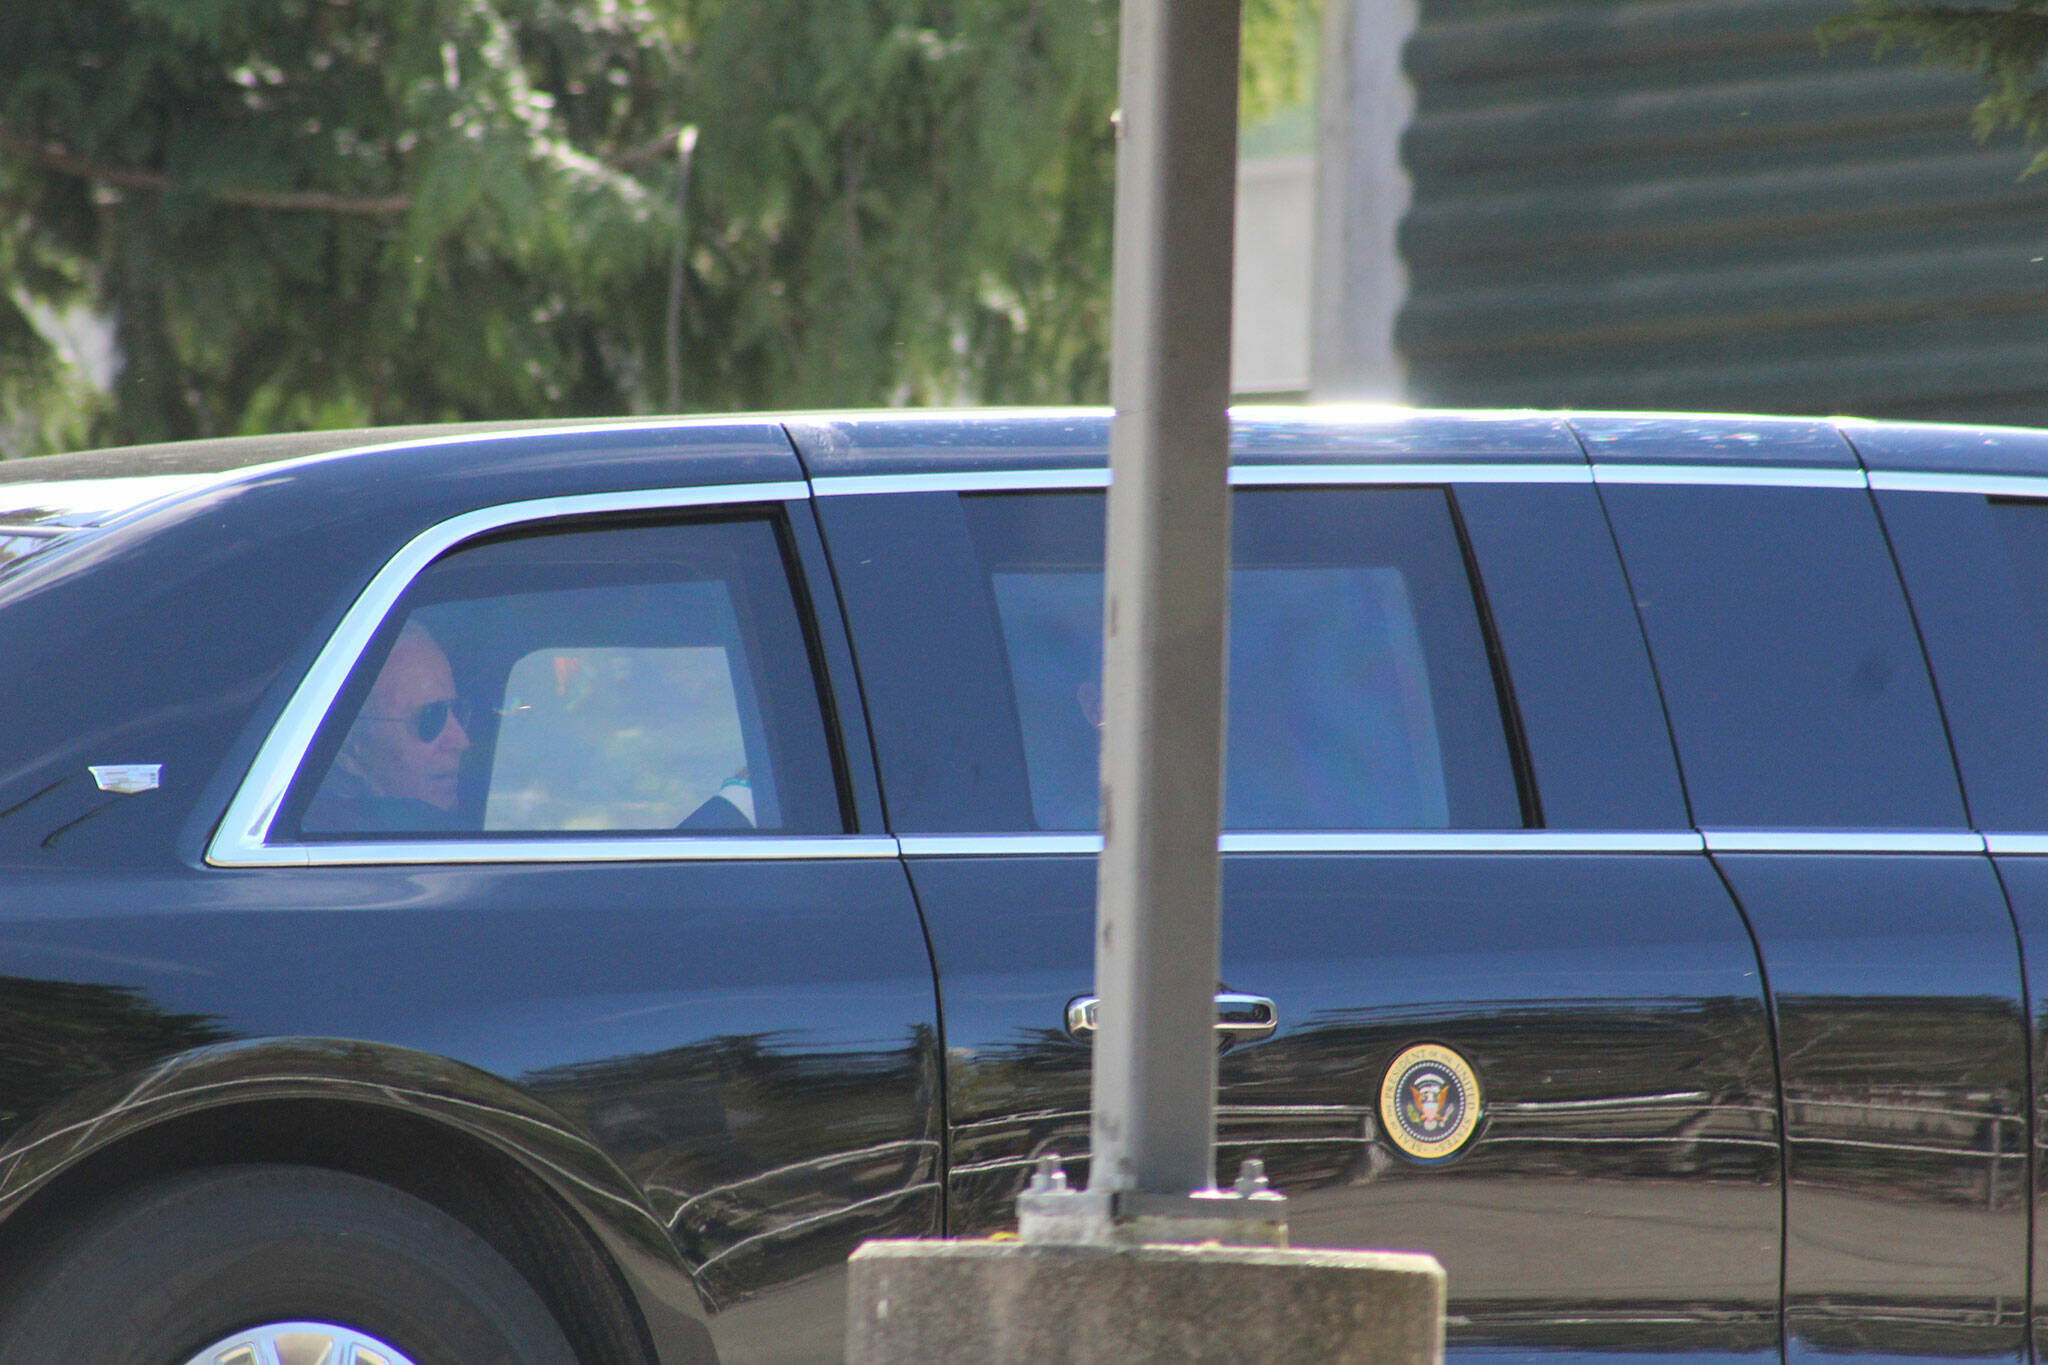 A man who appears to be President Joe Biden is seen in the back seat of a car in the president’s motorcade, departing the Green River College after the president’s speech. Photo by Alex Bruell/Sound Publishing